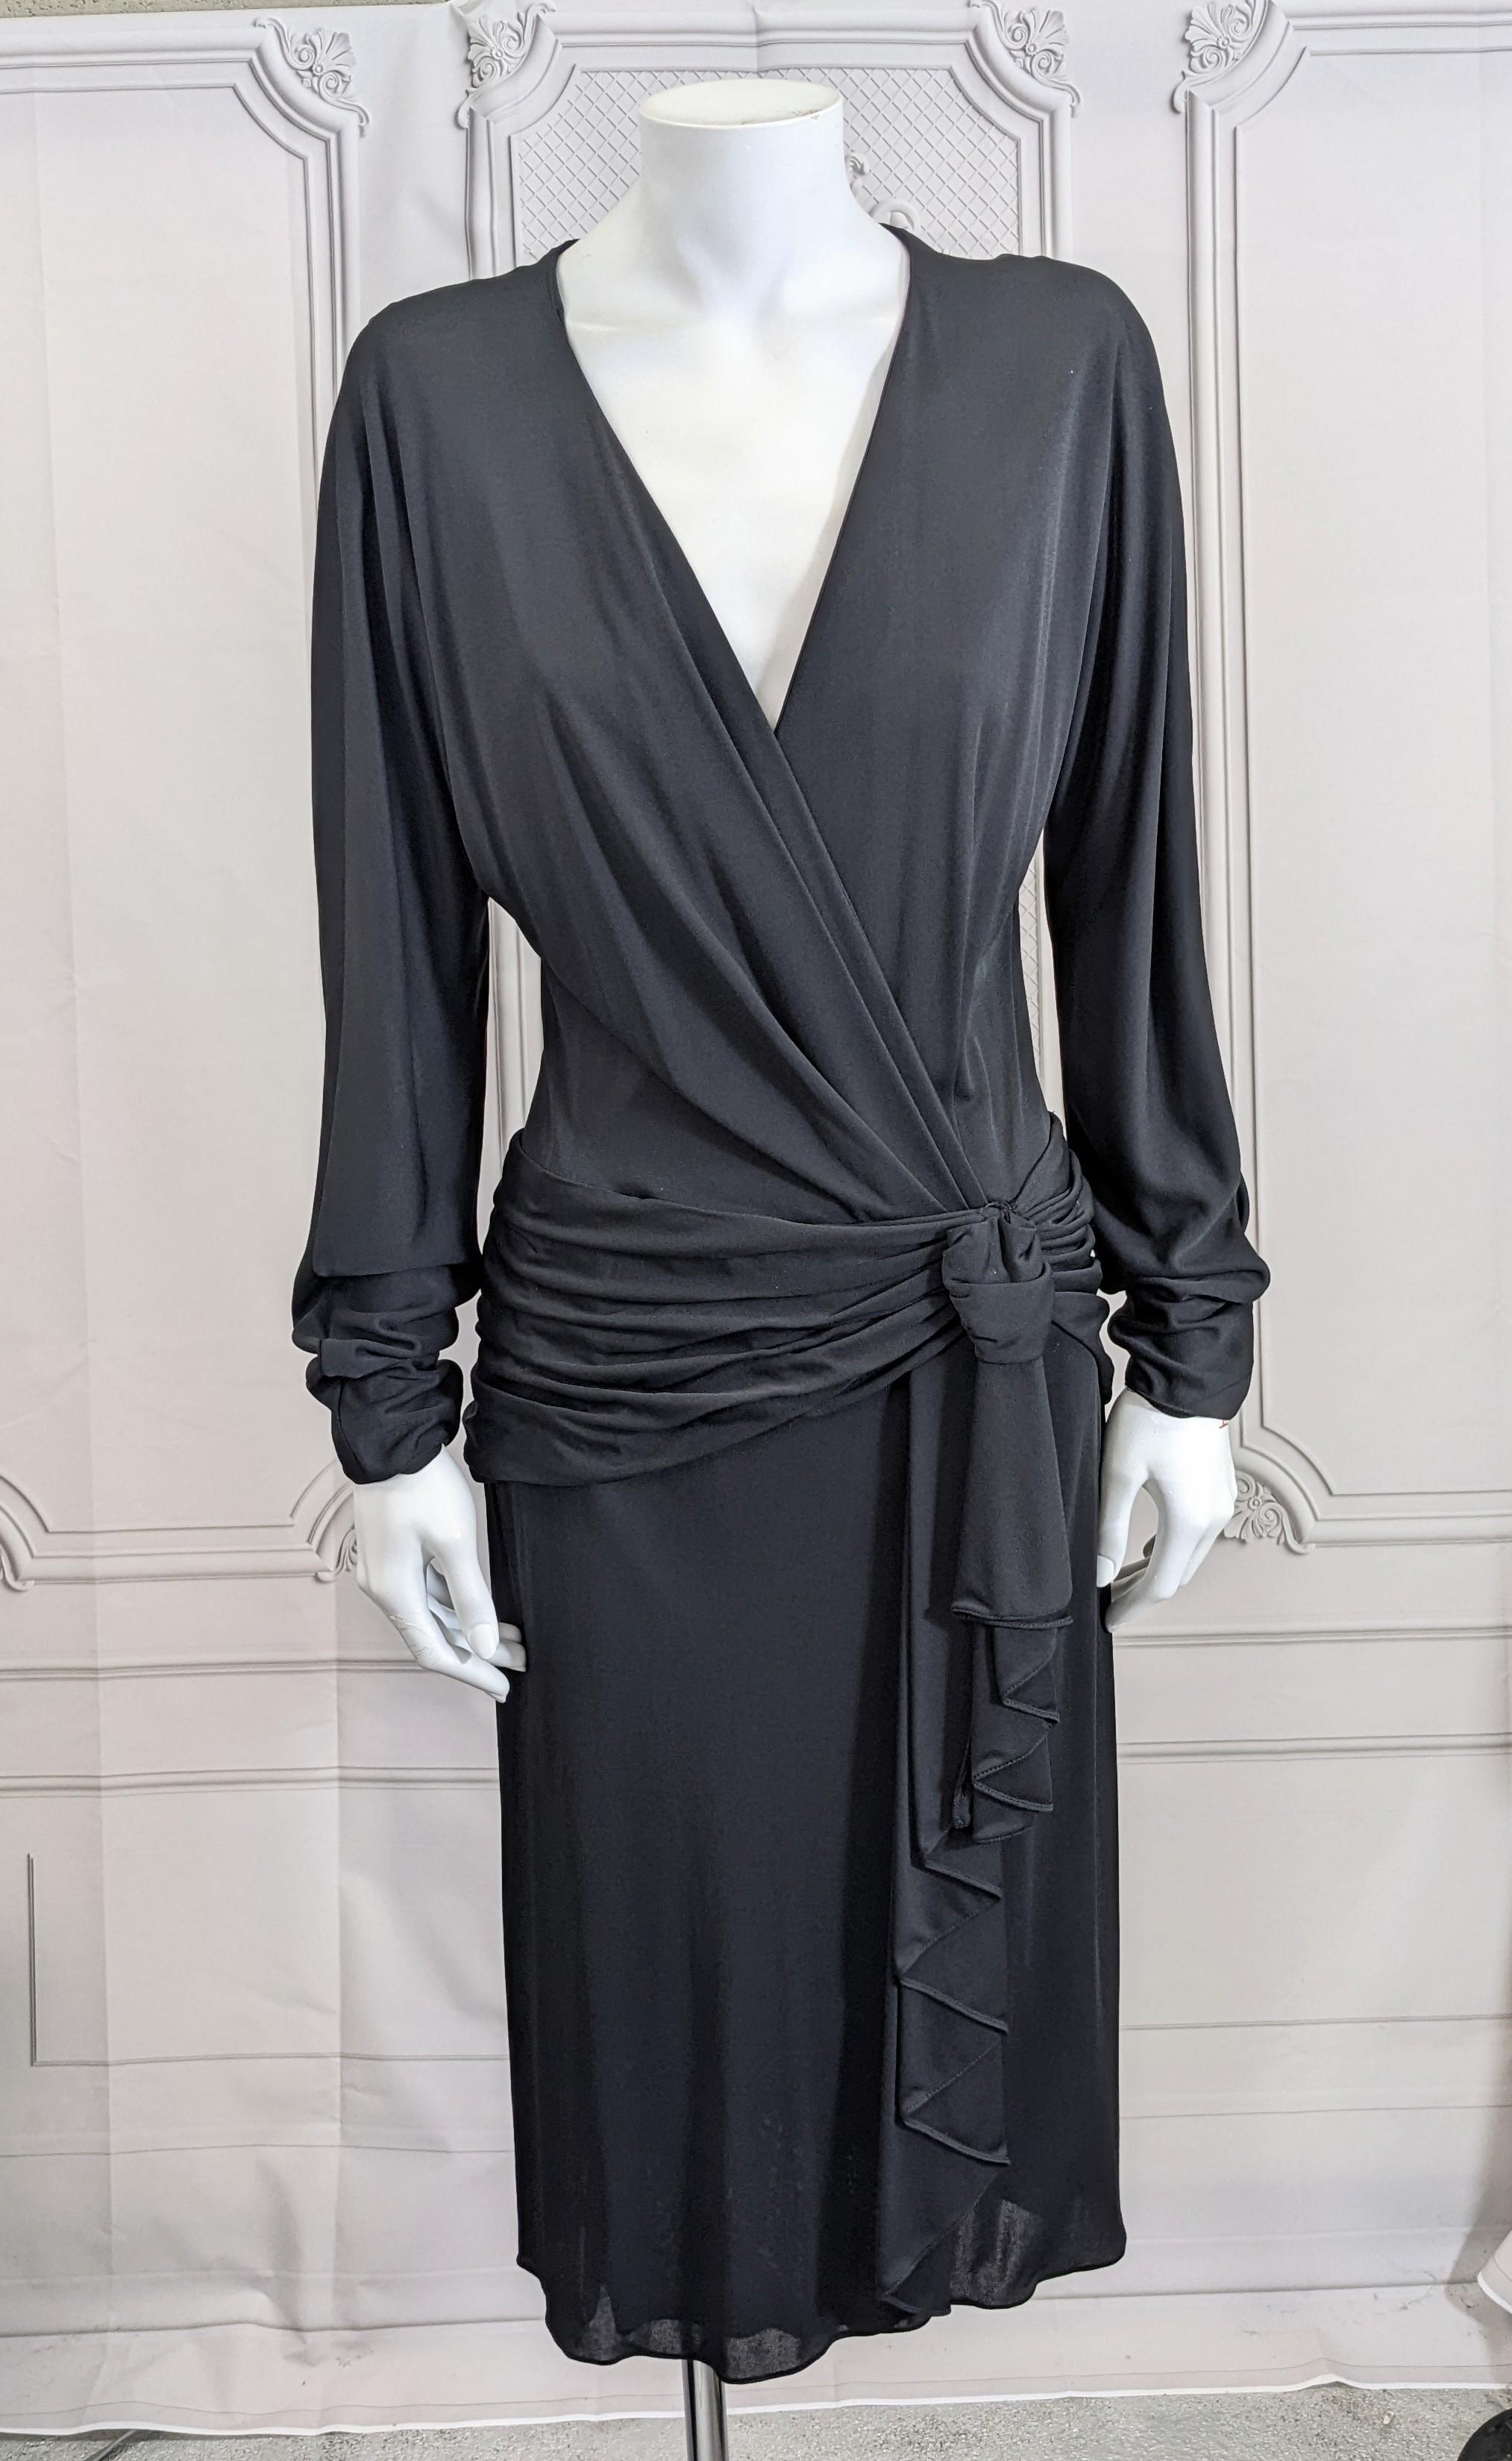 John Anthony Sexy Matte Jersey Wrap Dress. Great classic wrap style with one hook closure with draped cascade knot at hip. Dress has an interior grosgrain belt for stability and a ruched panel that extends from front around to the back. Elongated